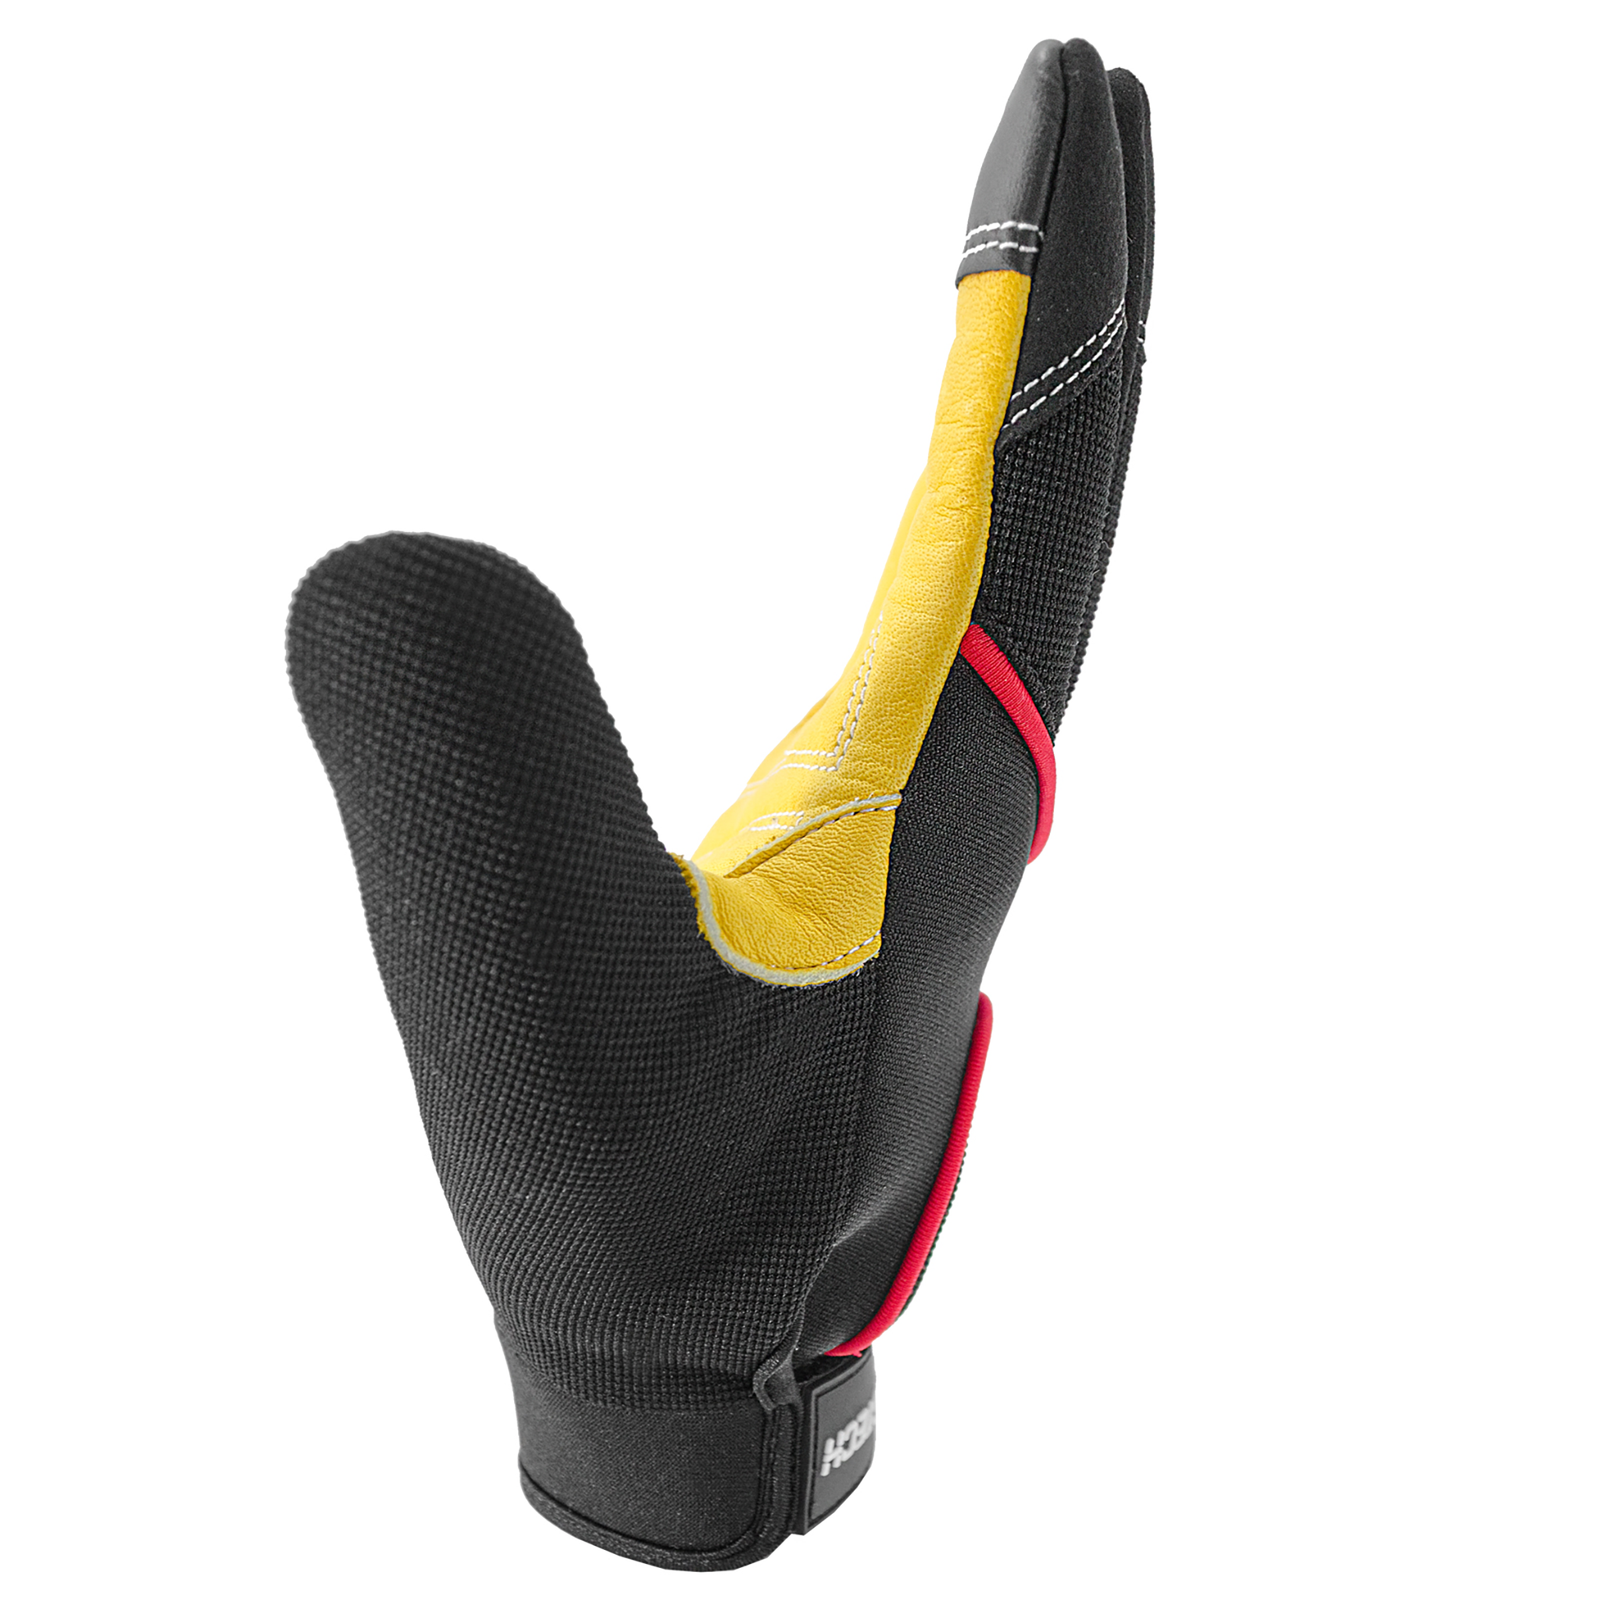 Black and Yellow leather palm JORESTECH safety work glove for mechanics